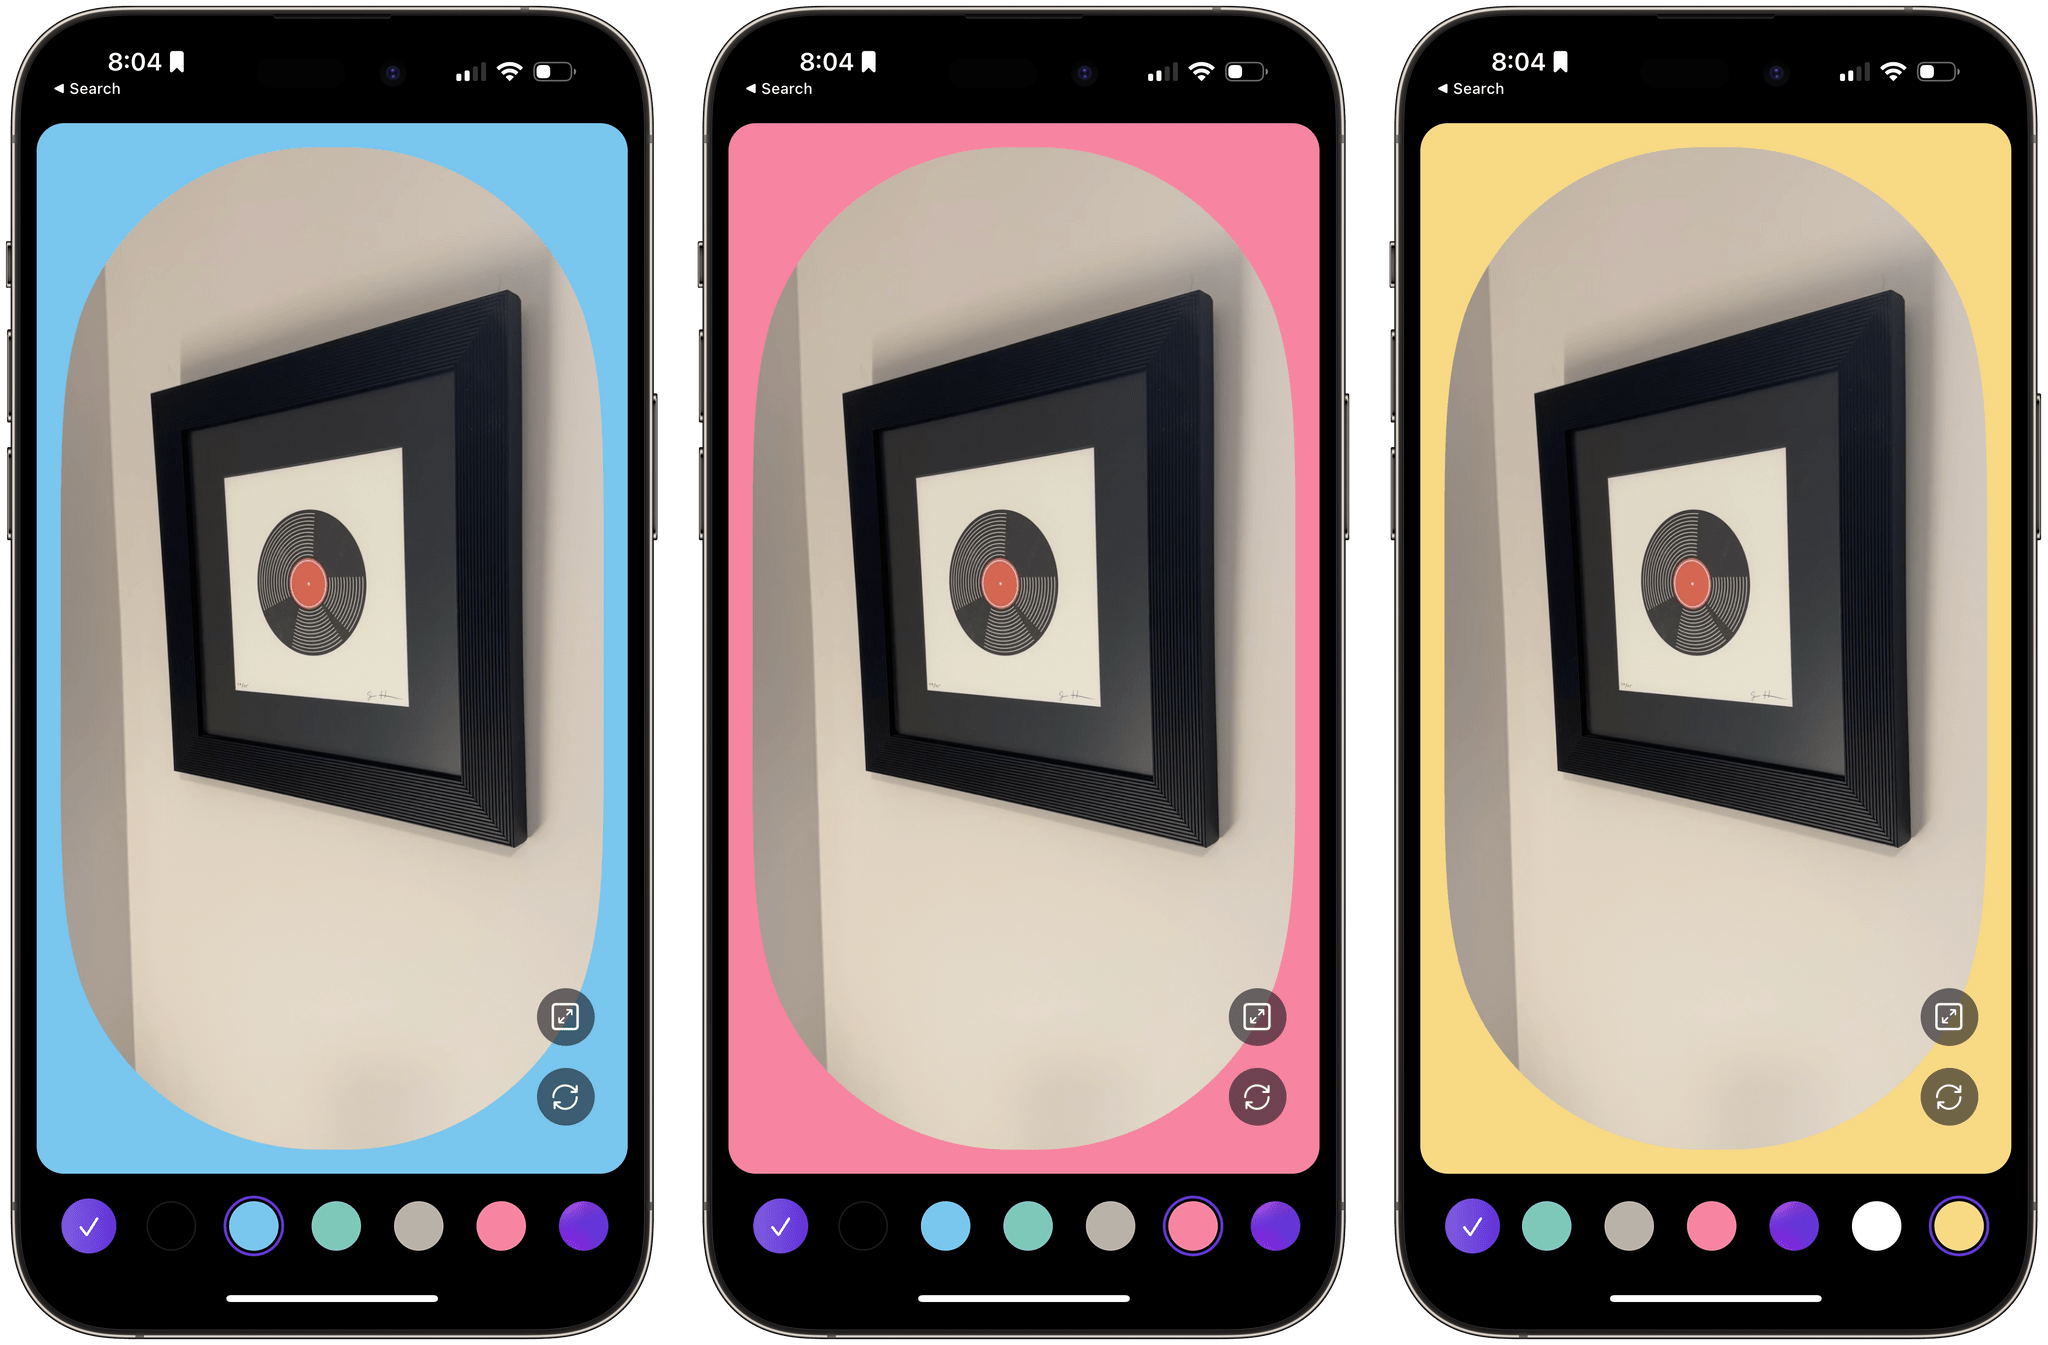 Some of Detail Duo's colorful framing options.